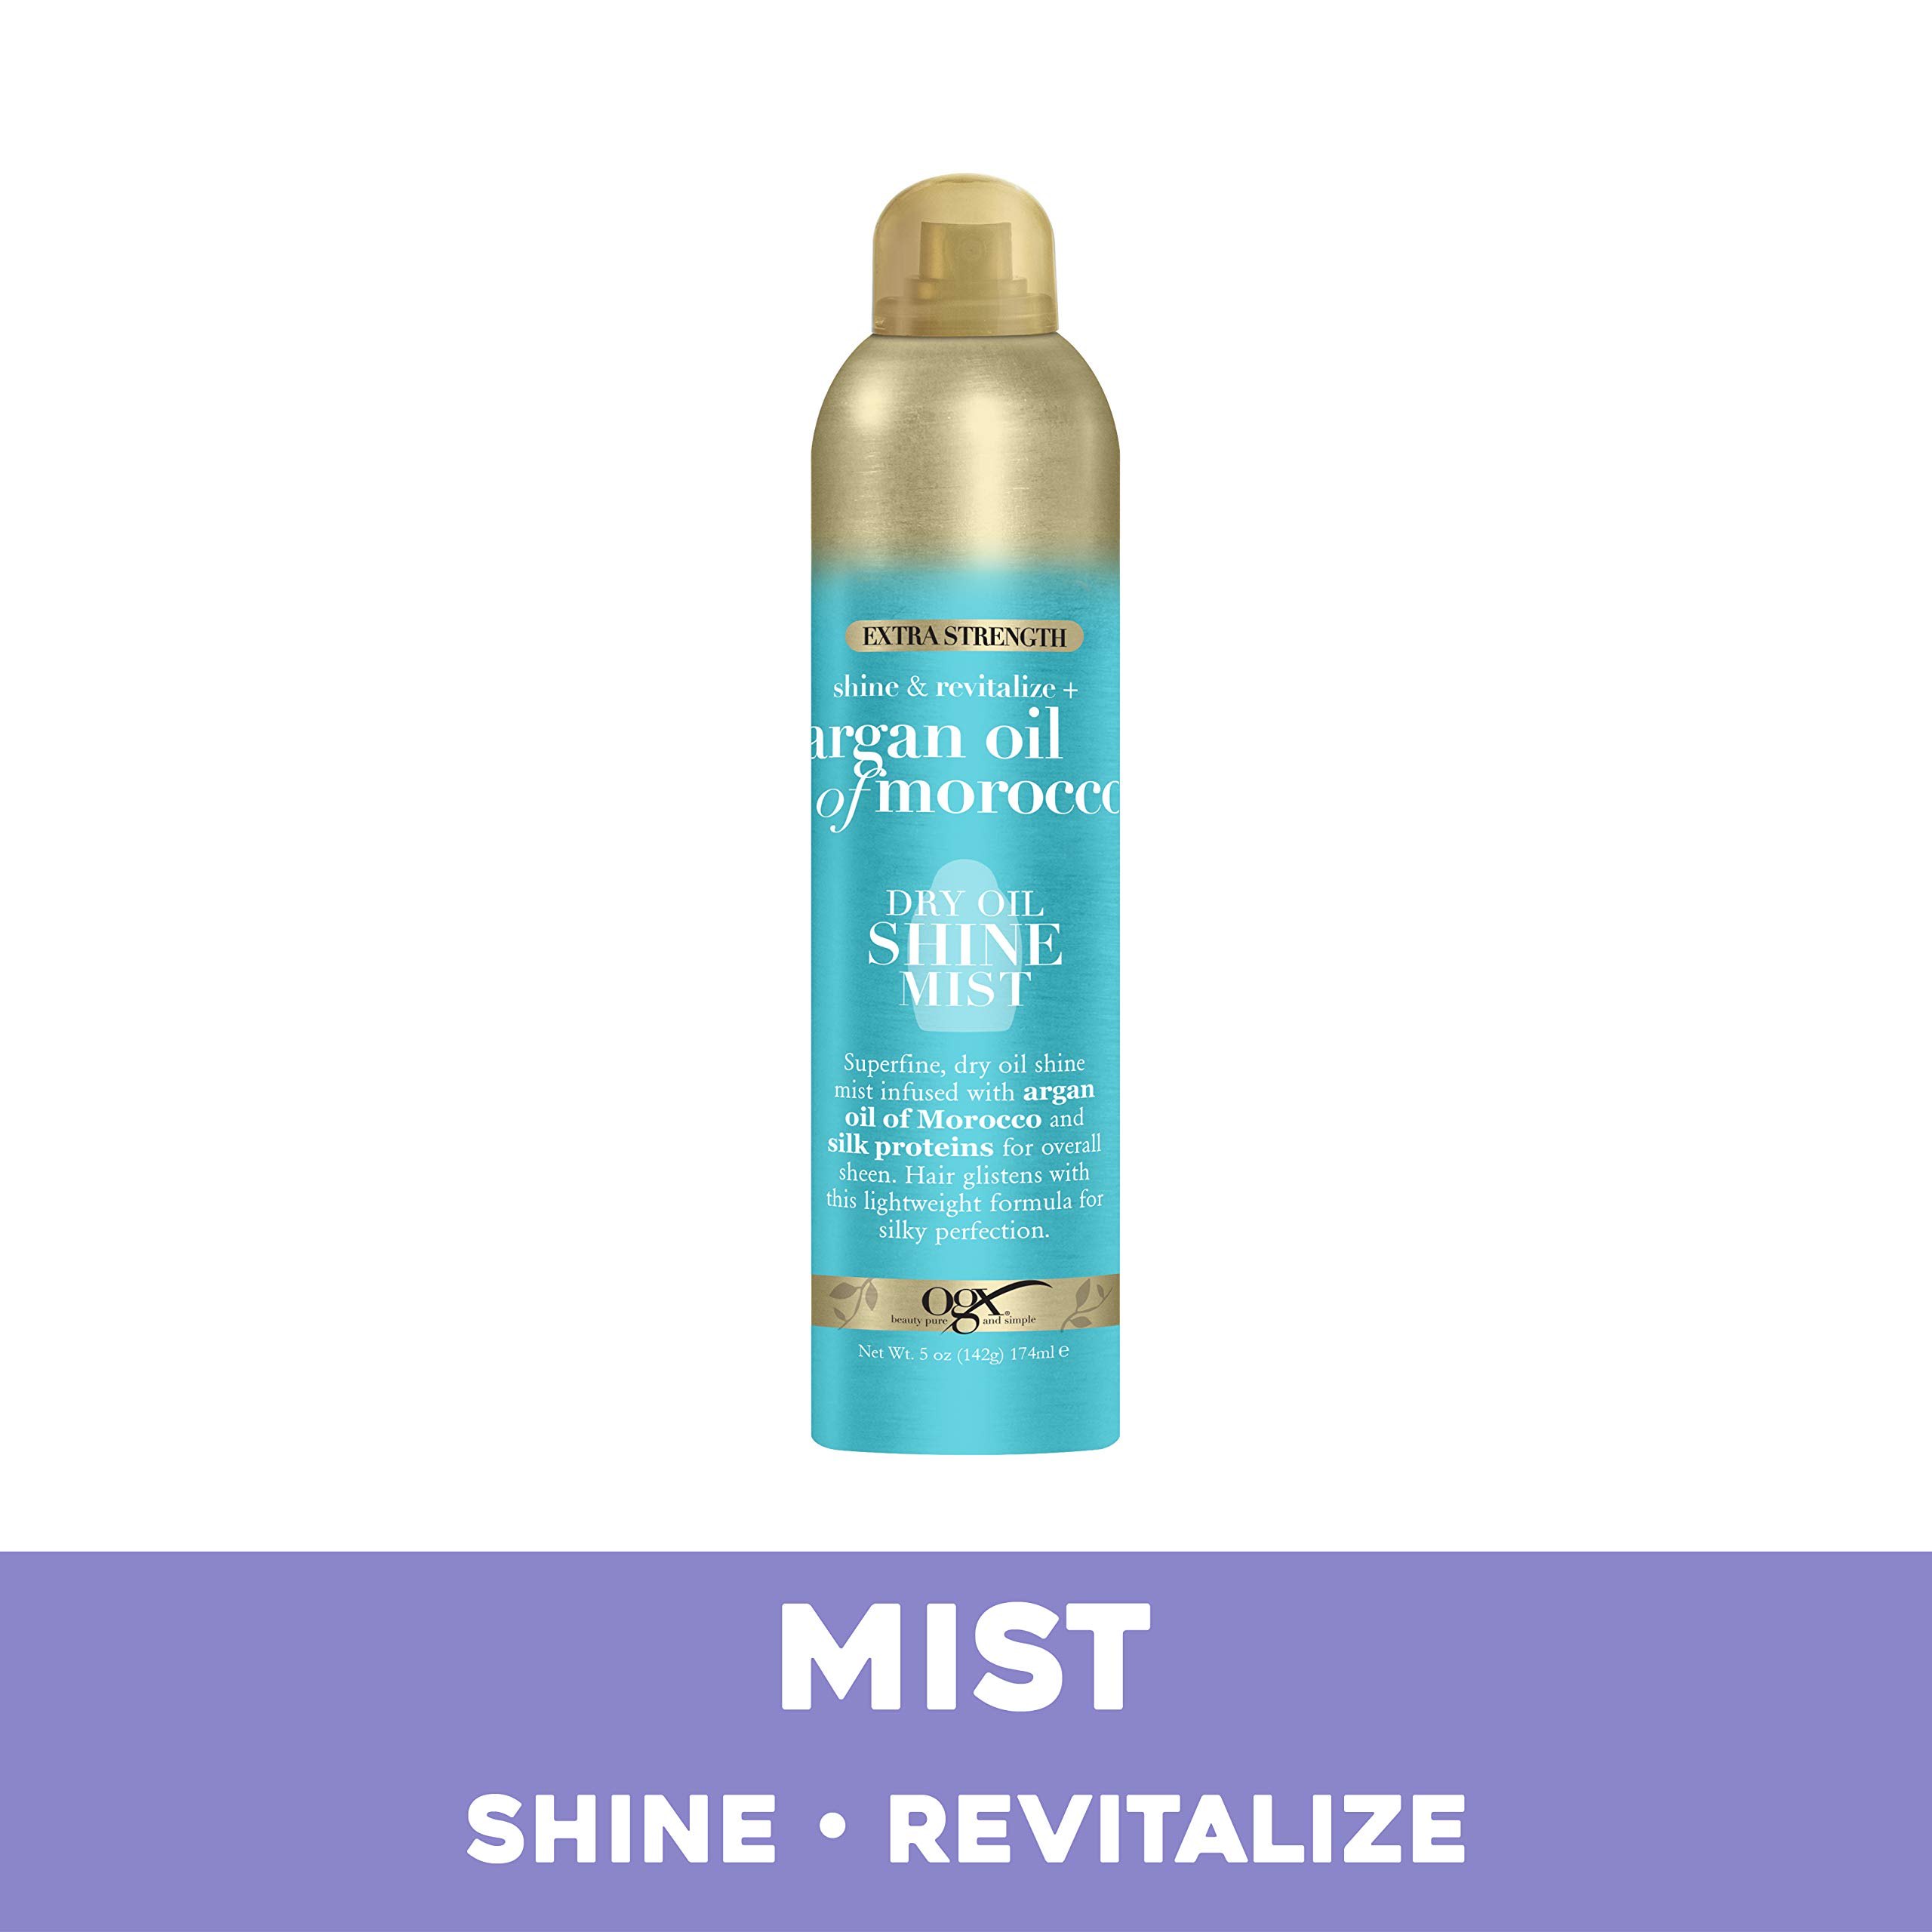 OGX Revitalize + Argan Shine Extra Strength Dry Oil Conditioning Mist with Argan Oil & Silk Proteins, Light Nourishing Hair Treatment to Soften Hair & Add Luminous Shine, 5 Ounce